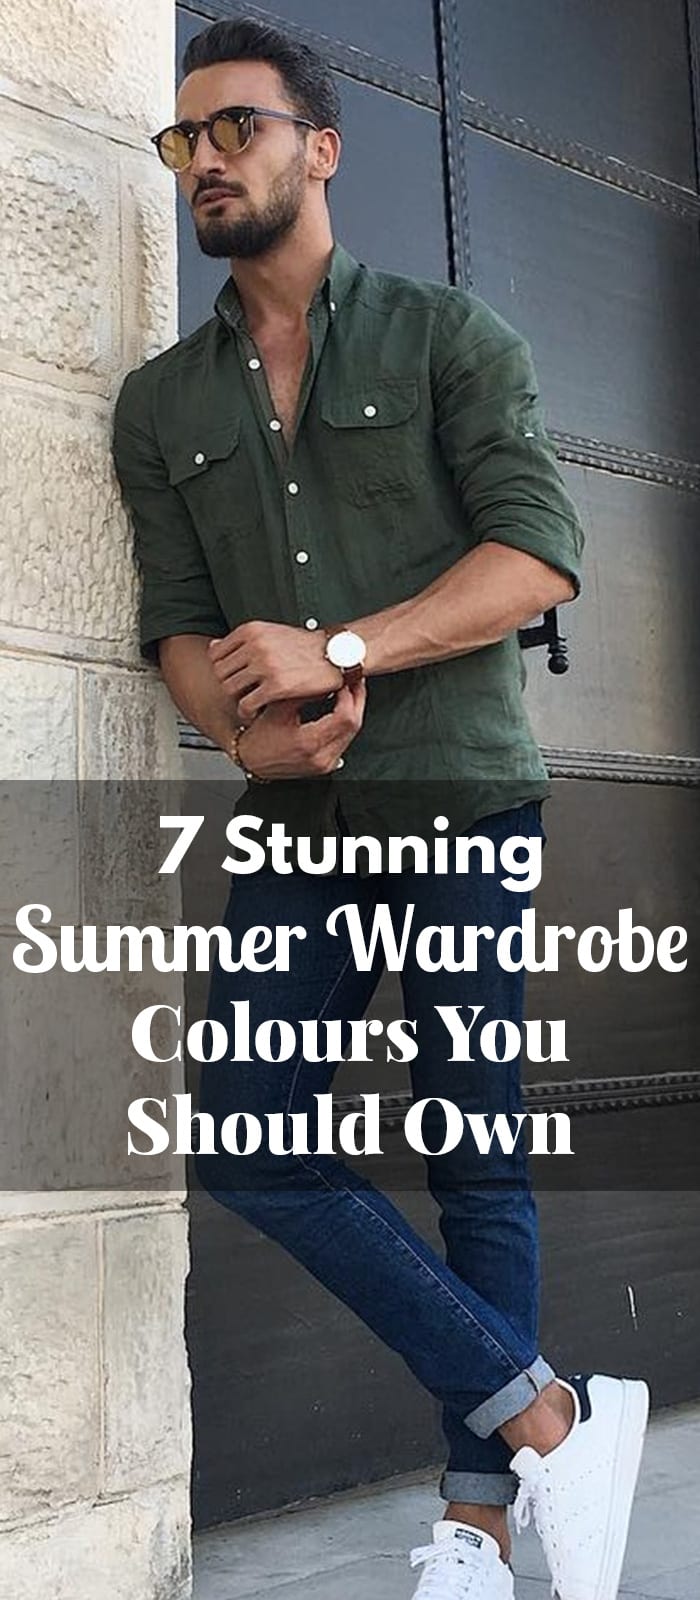 7 Stunning Summer Wardrobe Colours You Should Own